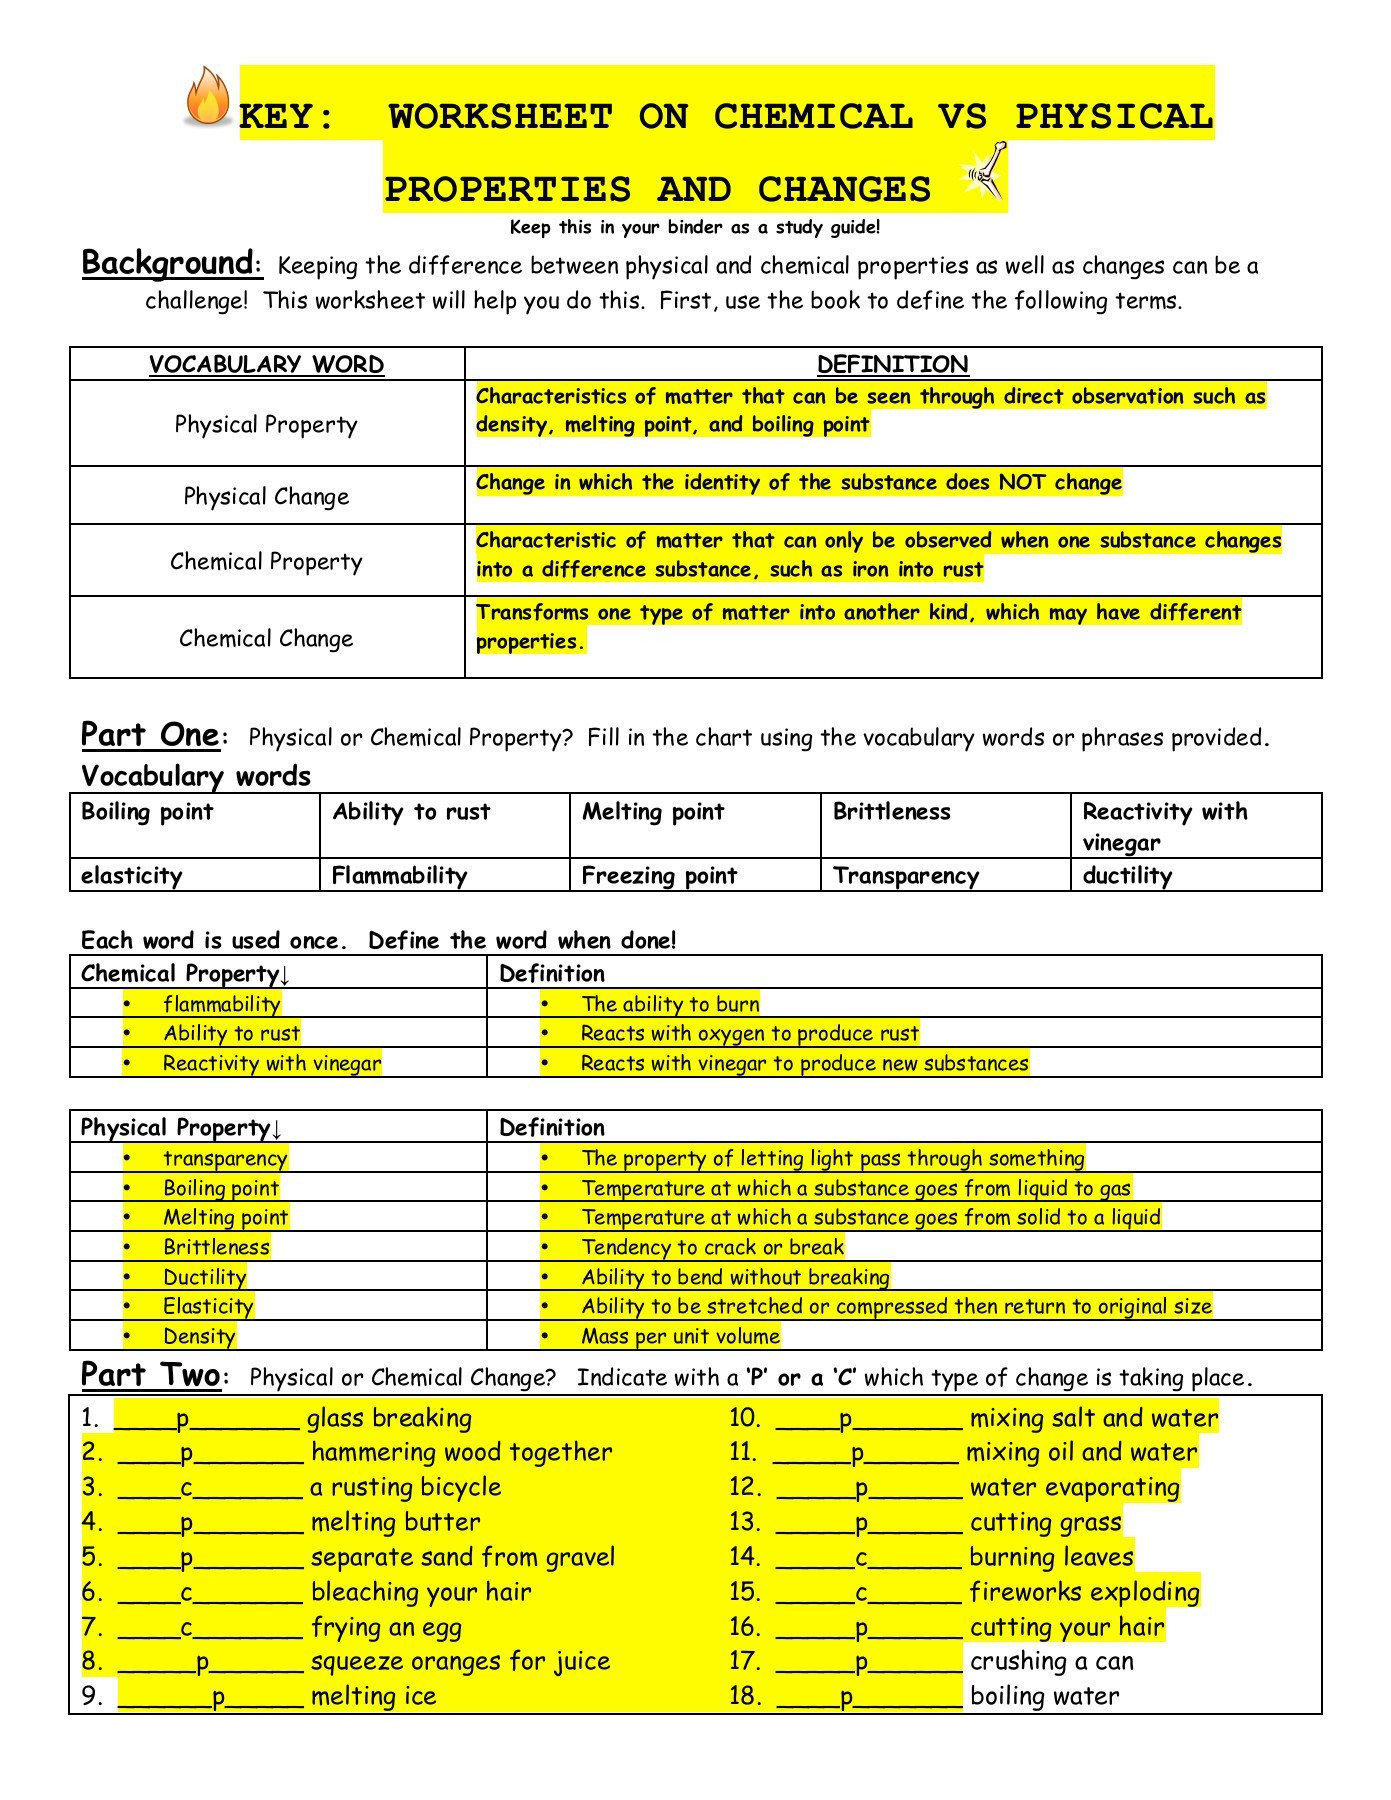 Physical and Chemical Properties Worksheet Worksheet On Chemical Vs Physical Properties and Changes